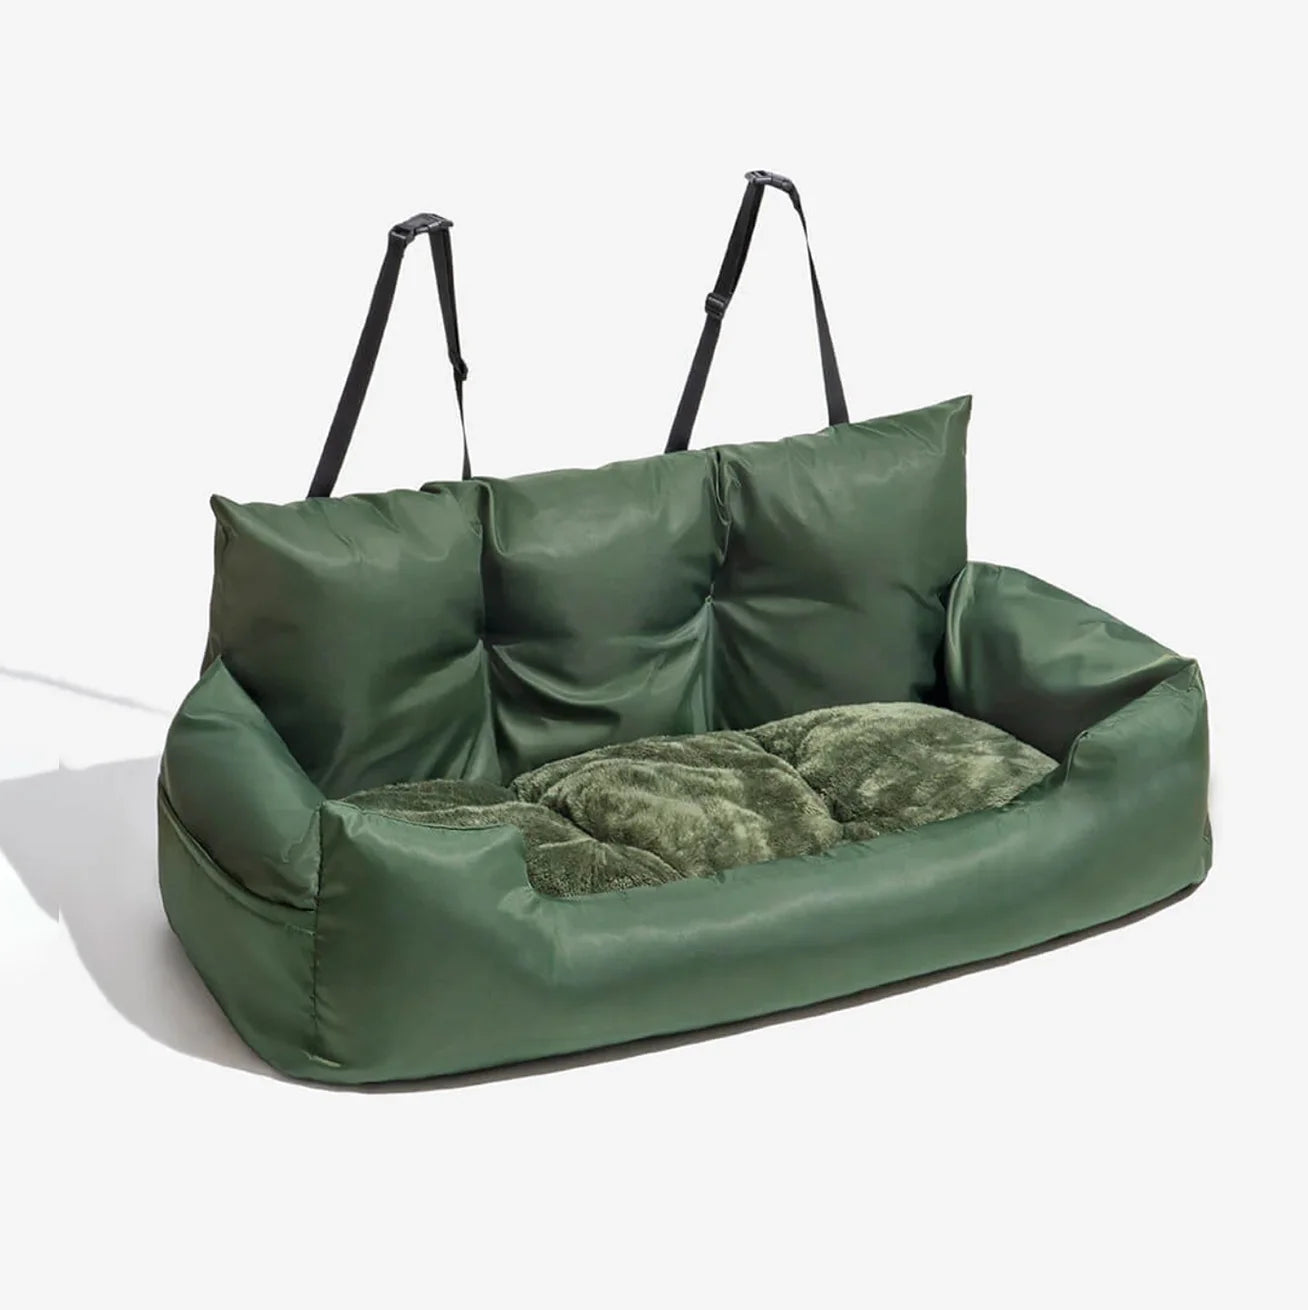 FluffyPuppy™ Green / Standard fluffypuppy™ Large Car Bed